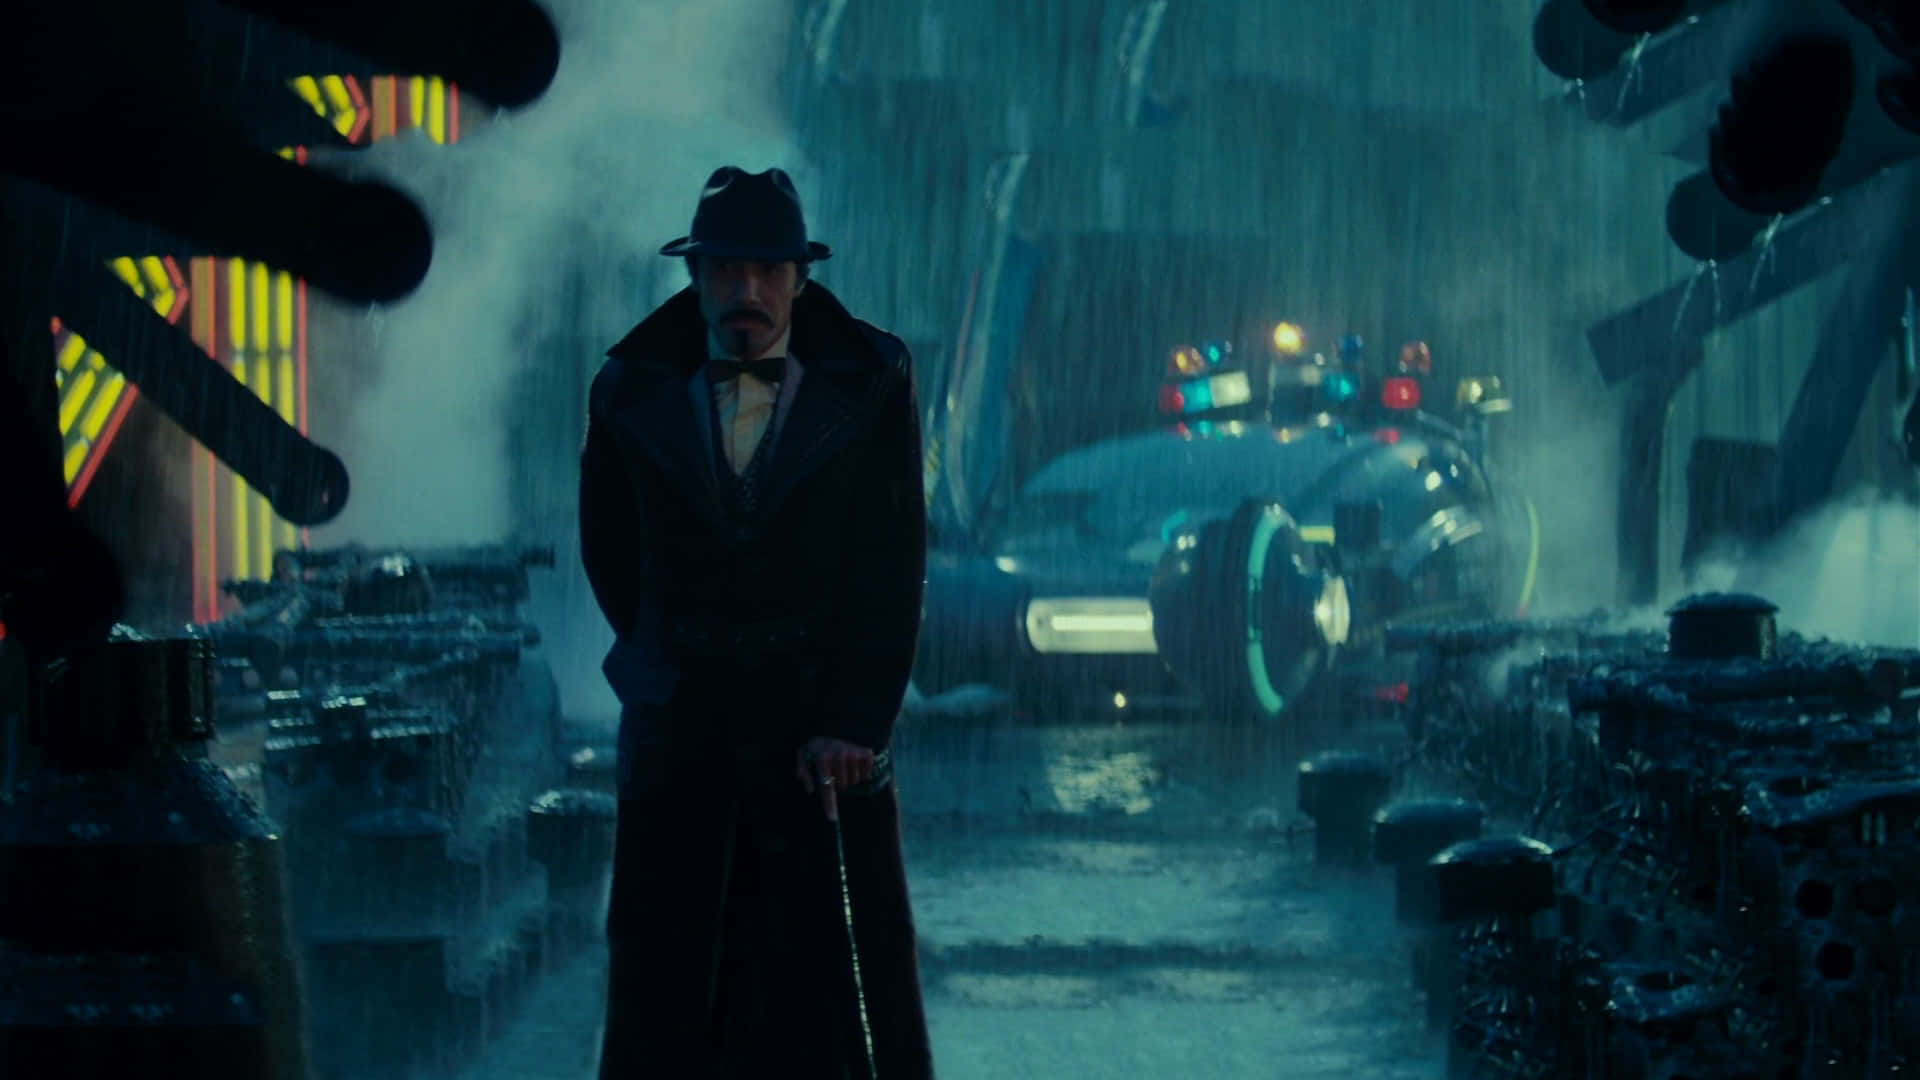 Follow your dreams in the sprawling cityscape of Blade Runner